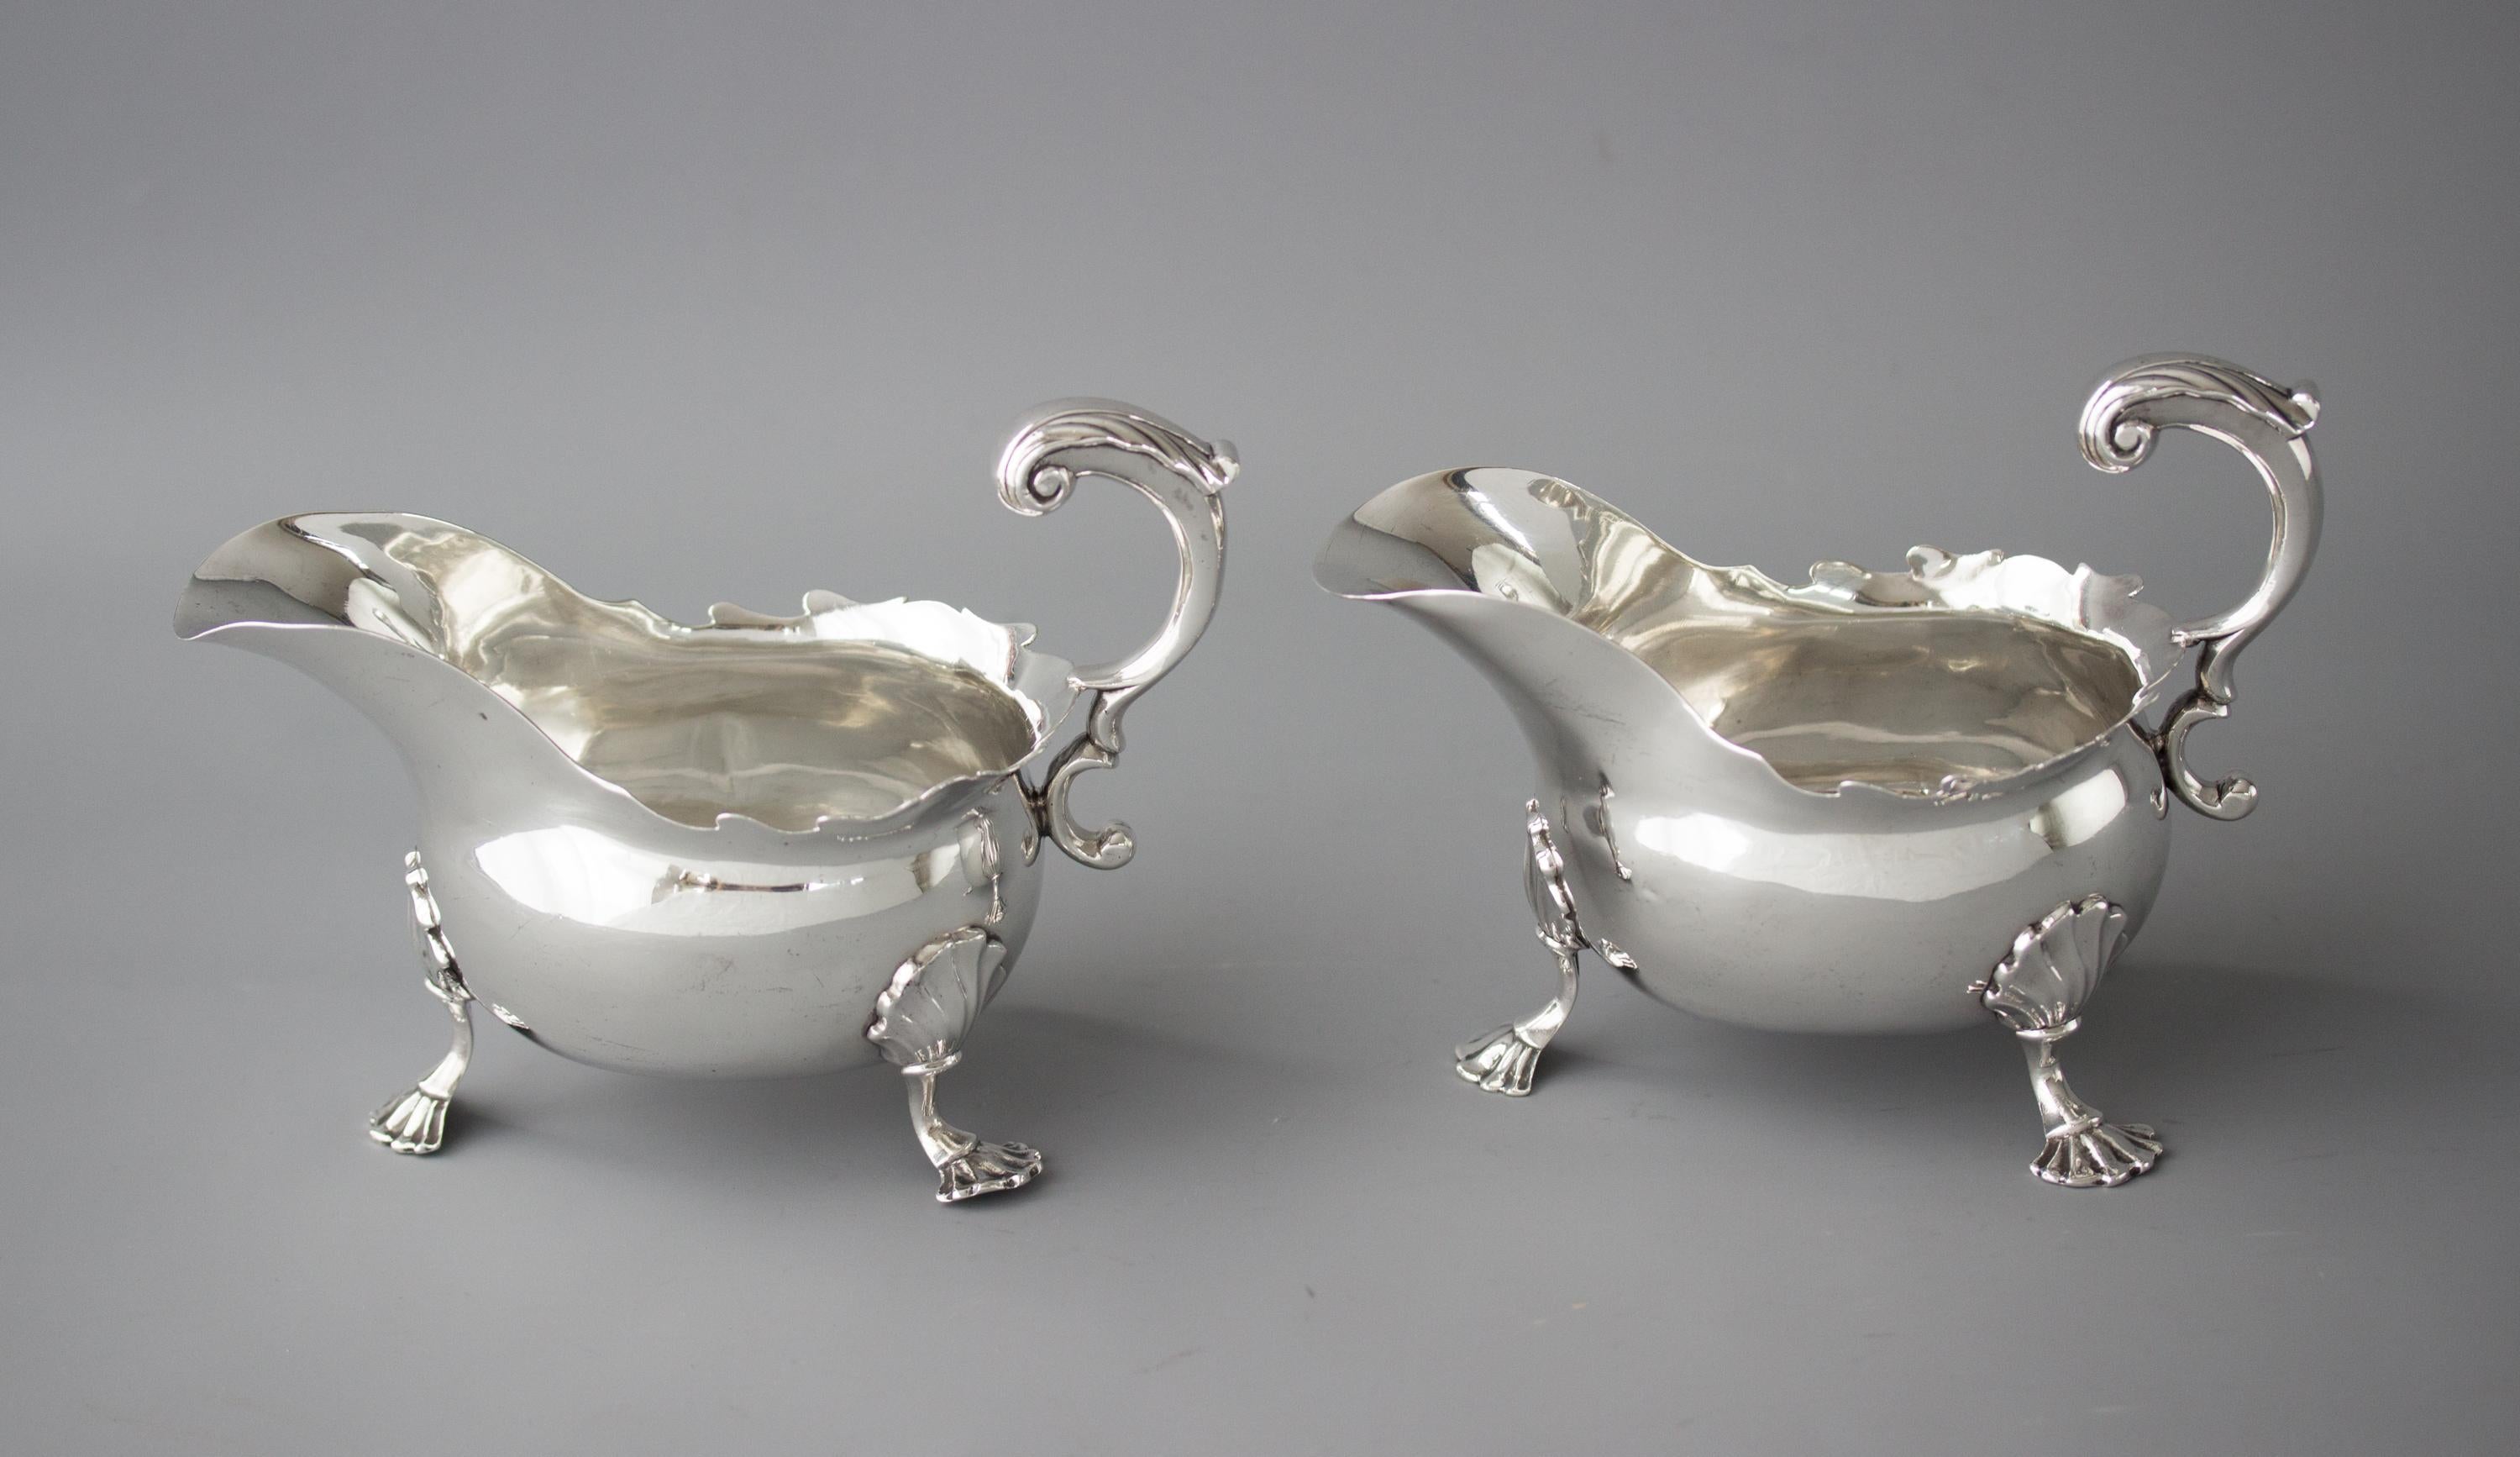 An exceptionally fine pair of large silver sauce boats with a cut card rim and a flying C-scroll handle. Each standing on three shell formed legs and shell pad feet. 

Both marked to the underside for London 1752 by David Bell and Richard Mills.